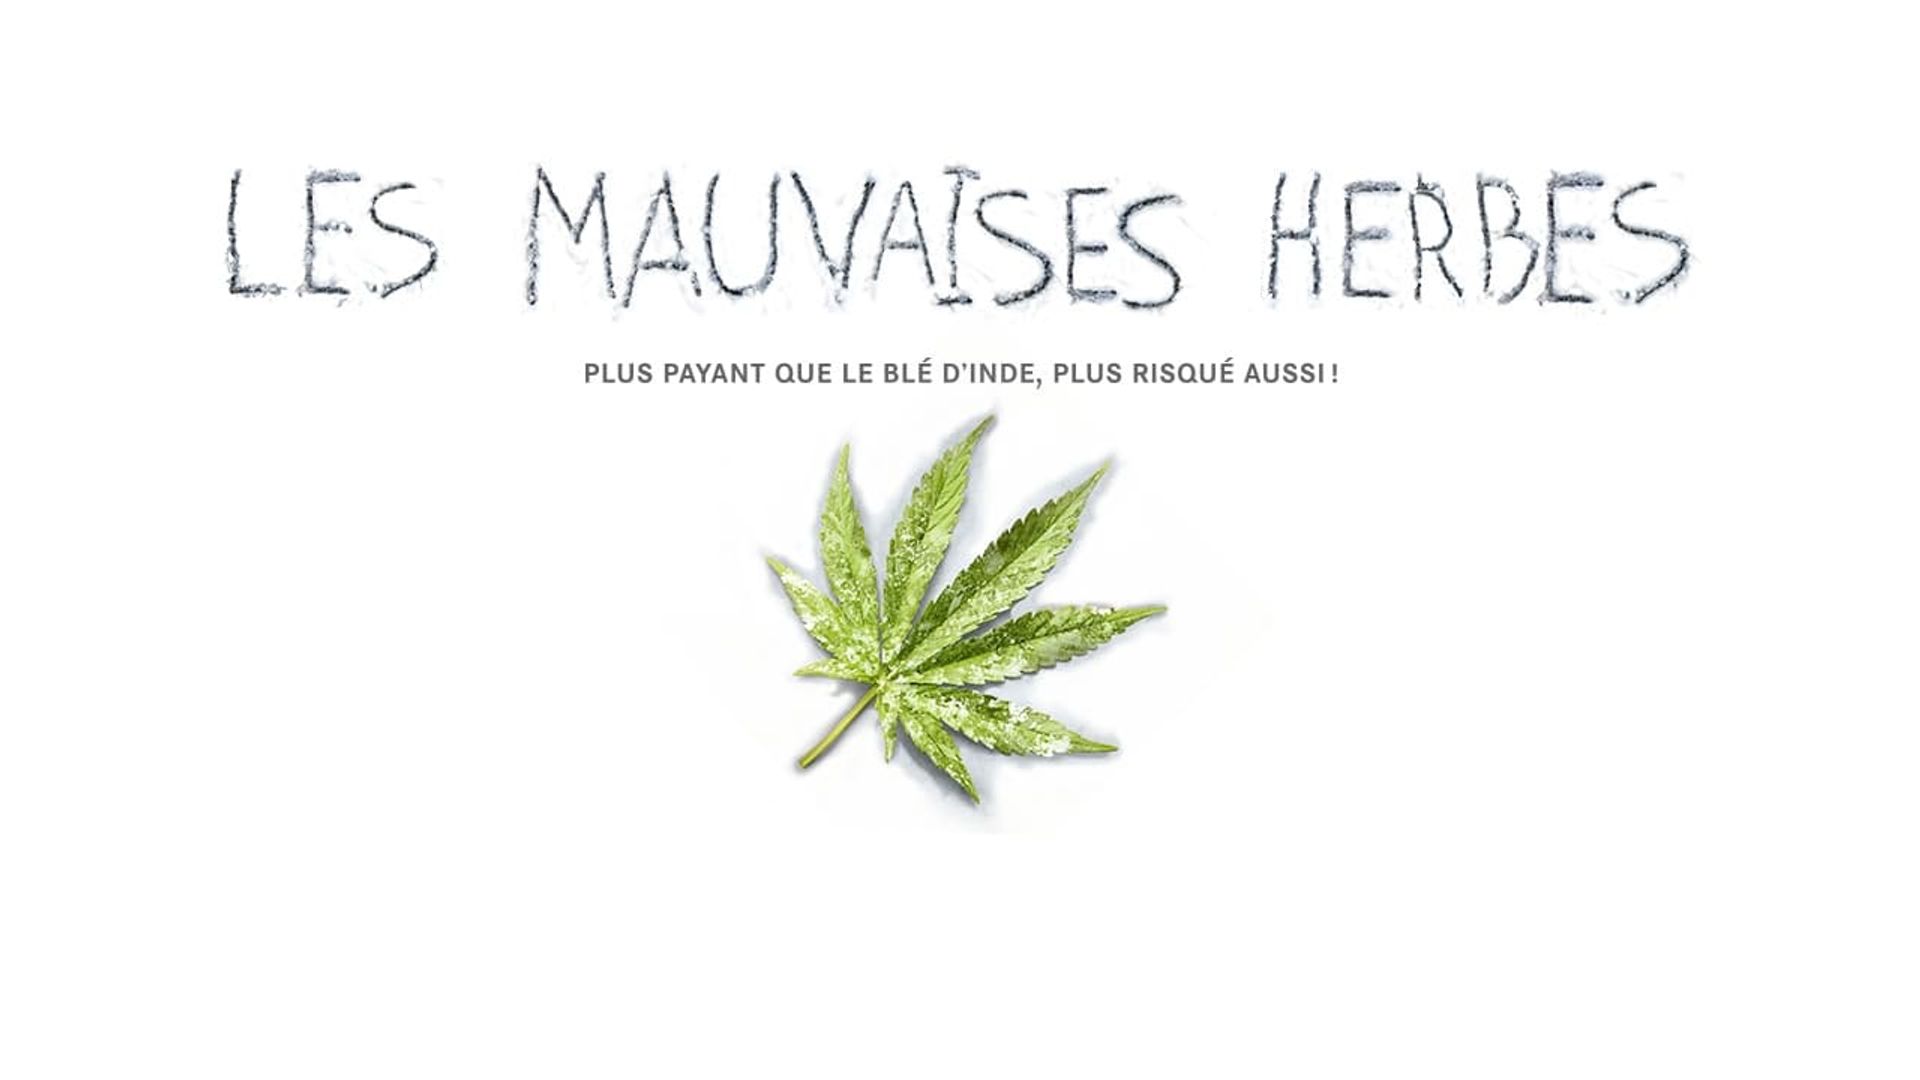 Les mauvaises herbes background